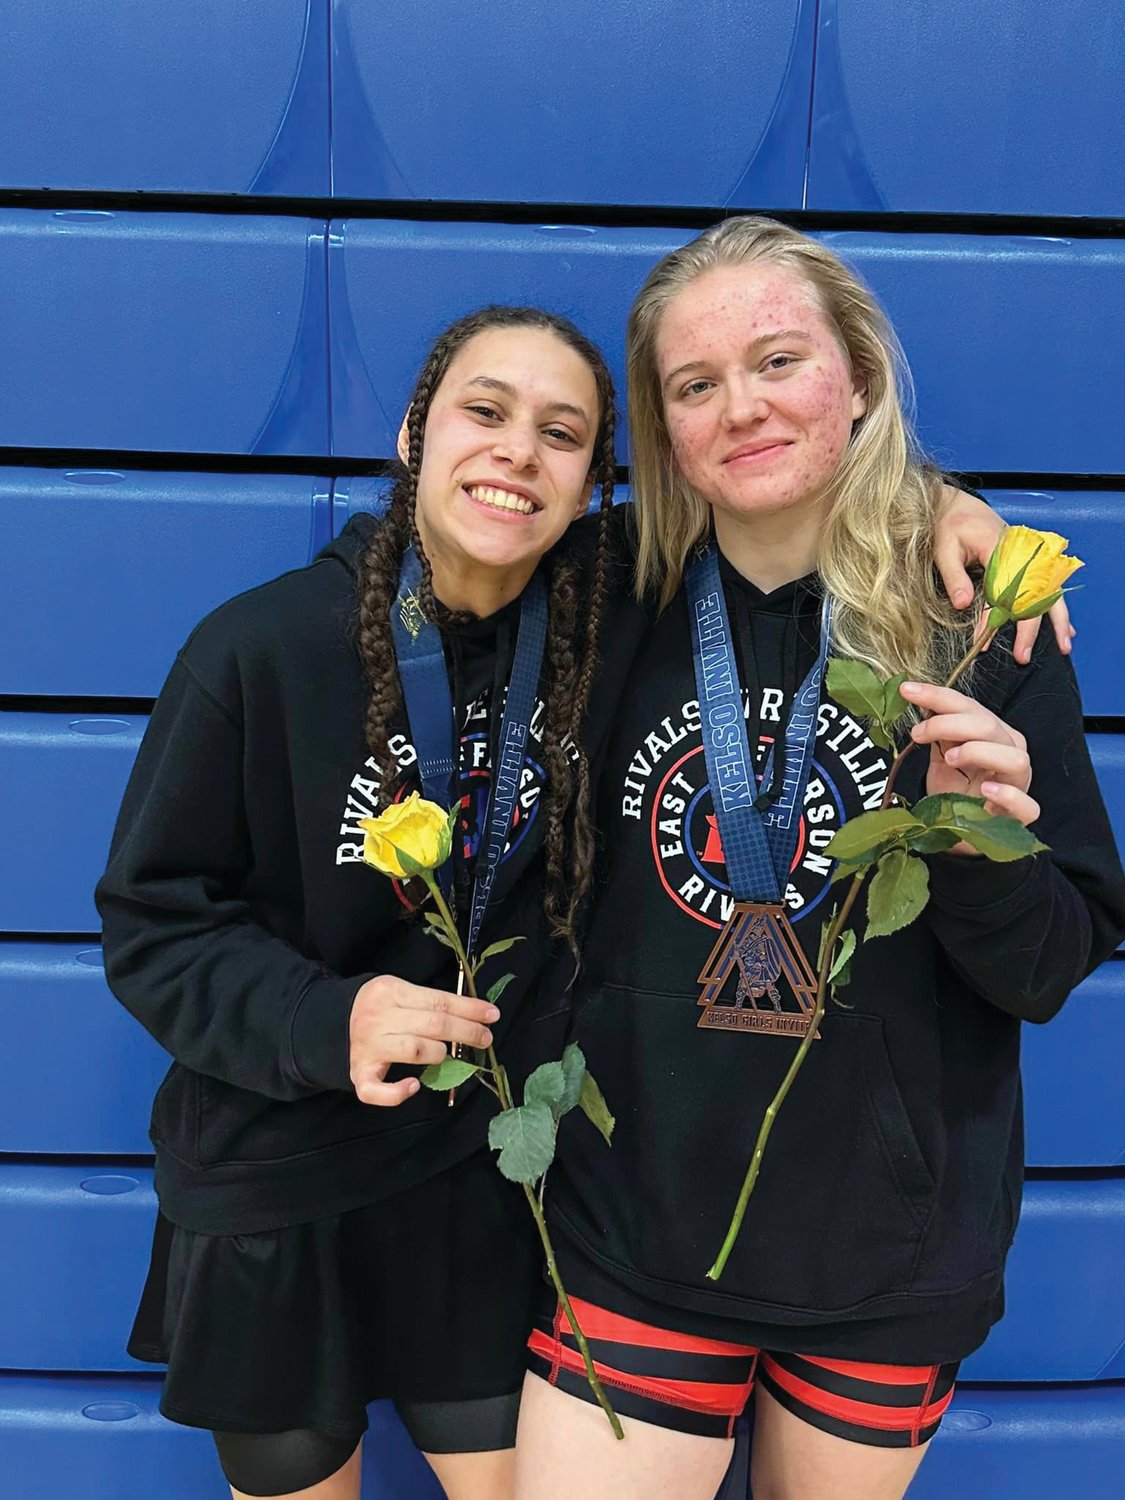 Mi Amada Lanphear Ramirez and Melody Douglas pose after wrestling in the WIAA Kelso Girls Invitational, the largest girls’ tournament in the nation.